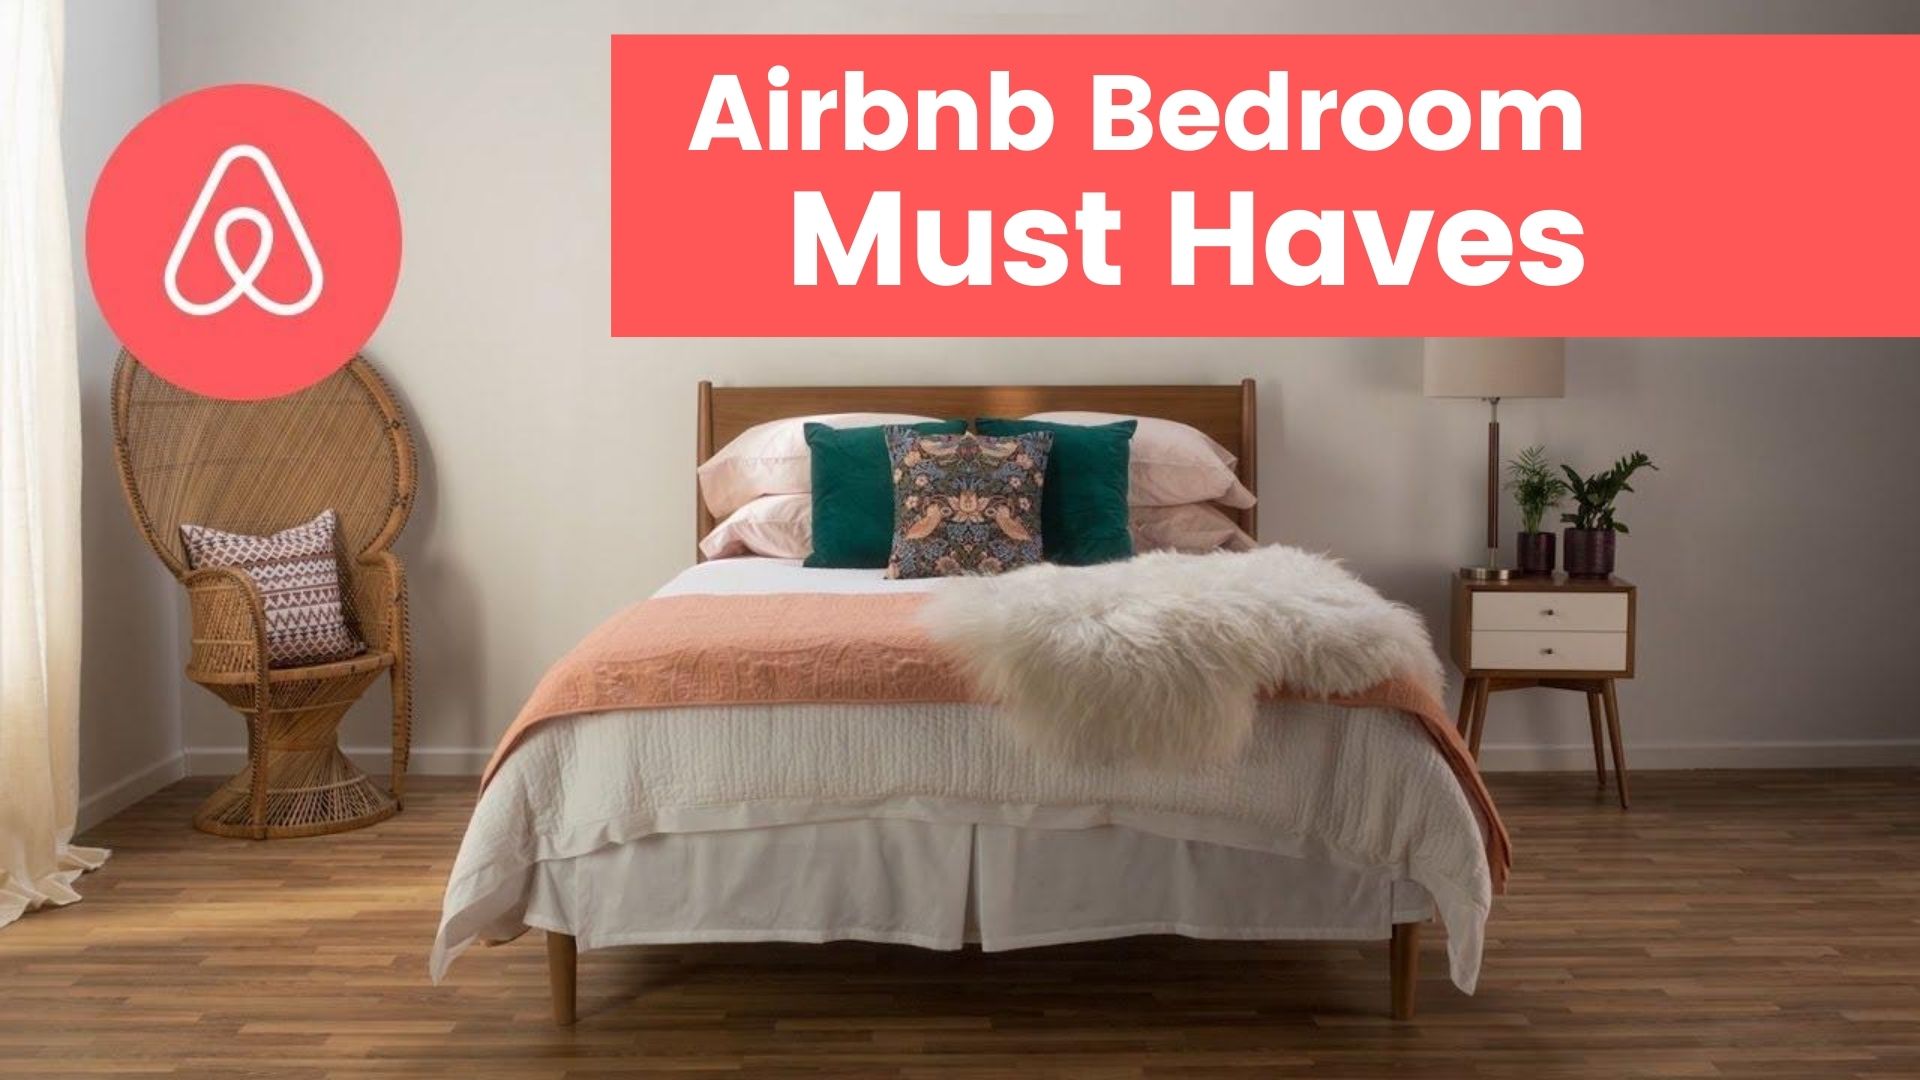 Airbnb Bedroom Must Haves